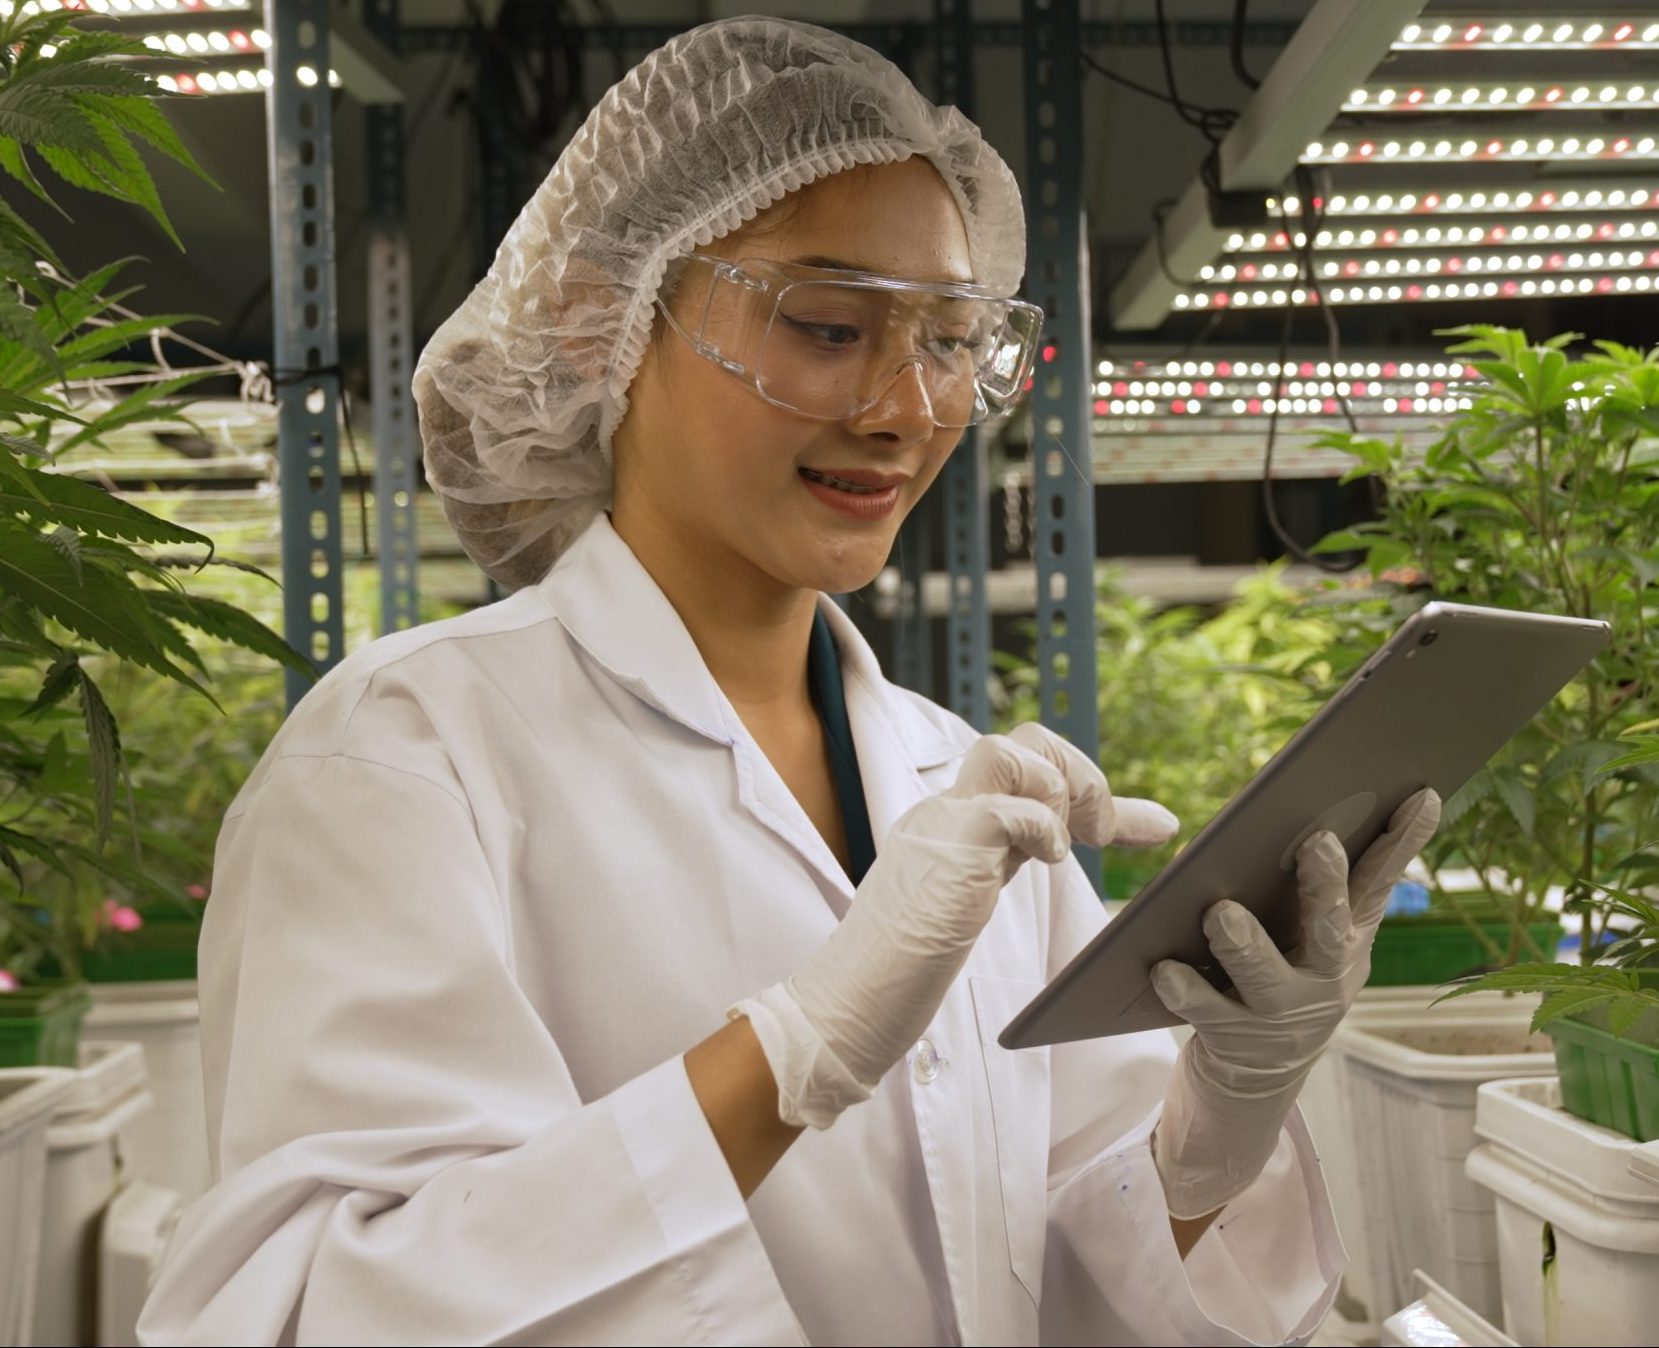 Scientist test cannabis product in curative indoor cannabis farm with scientific equipment before harvesting to produce cannabis products